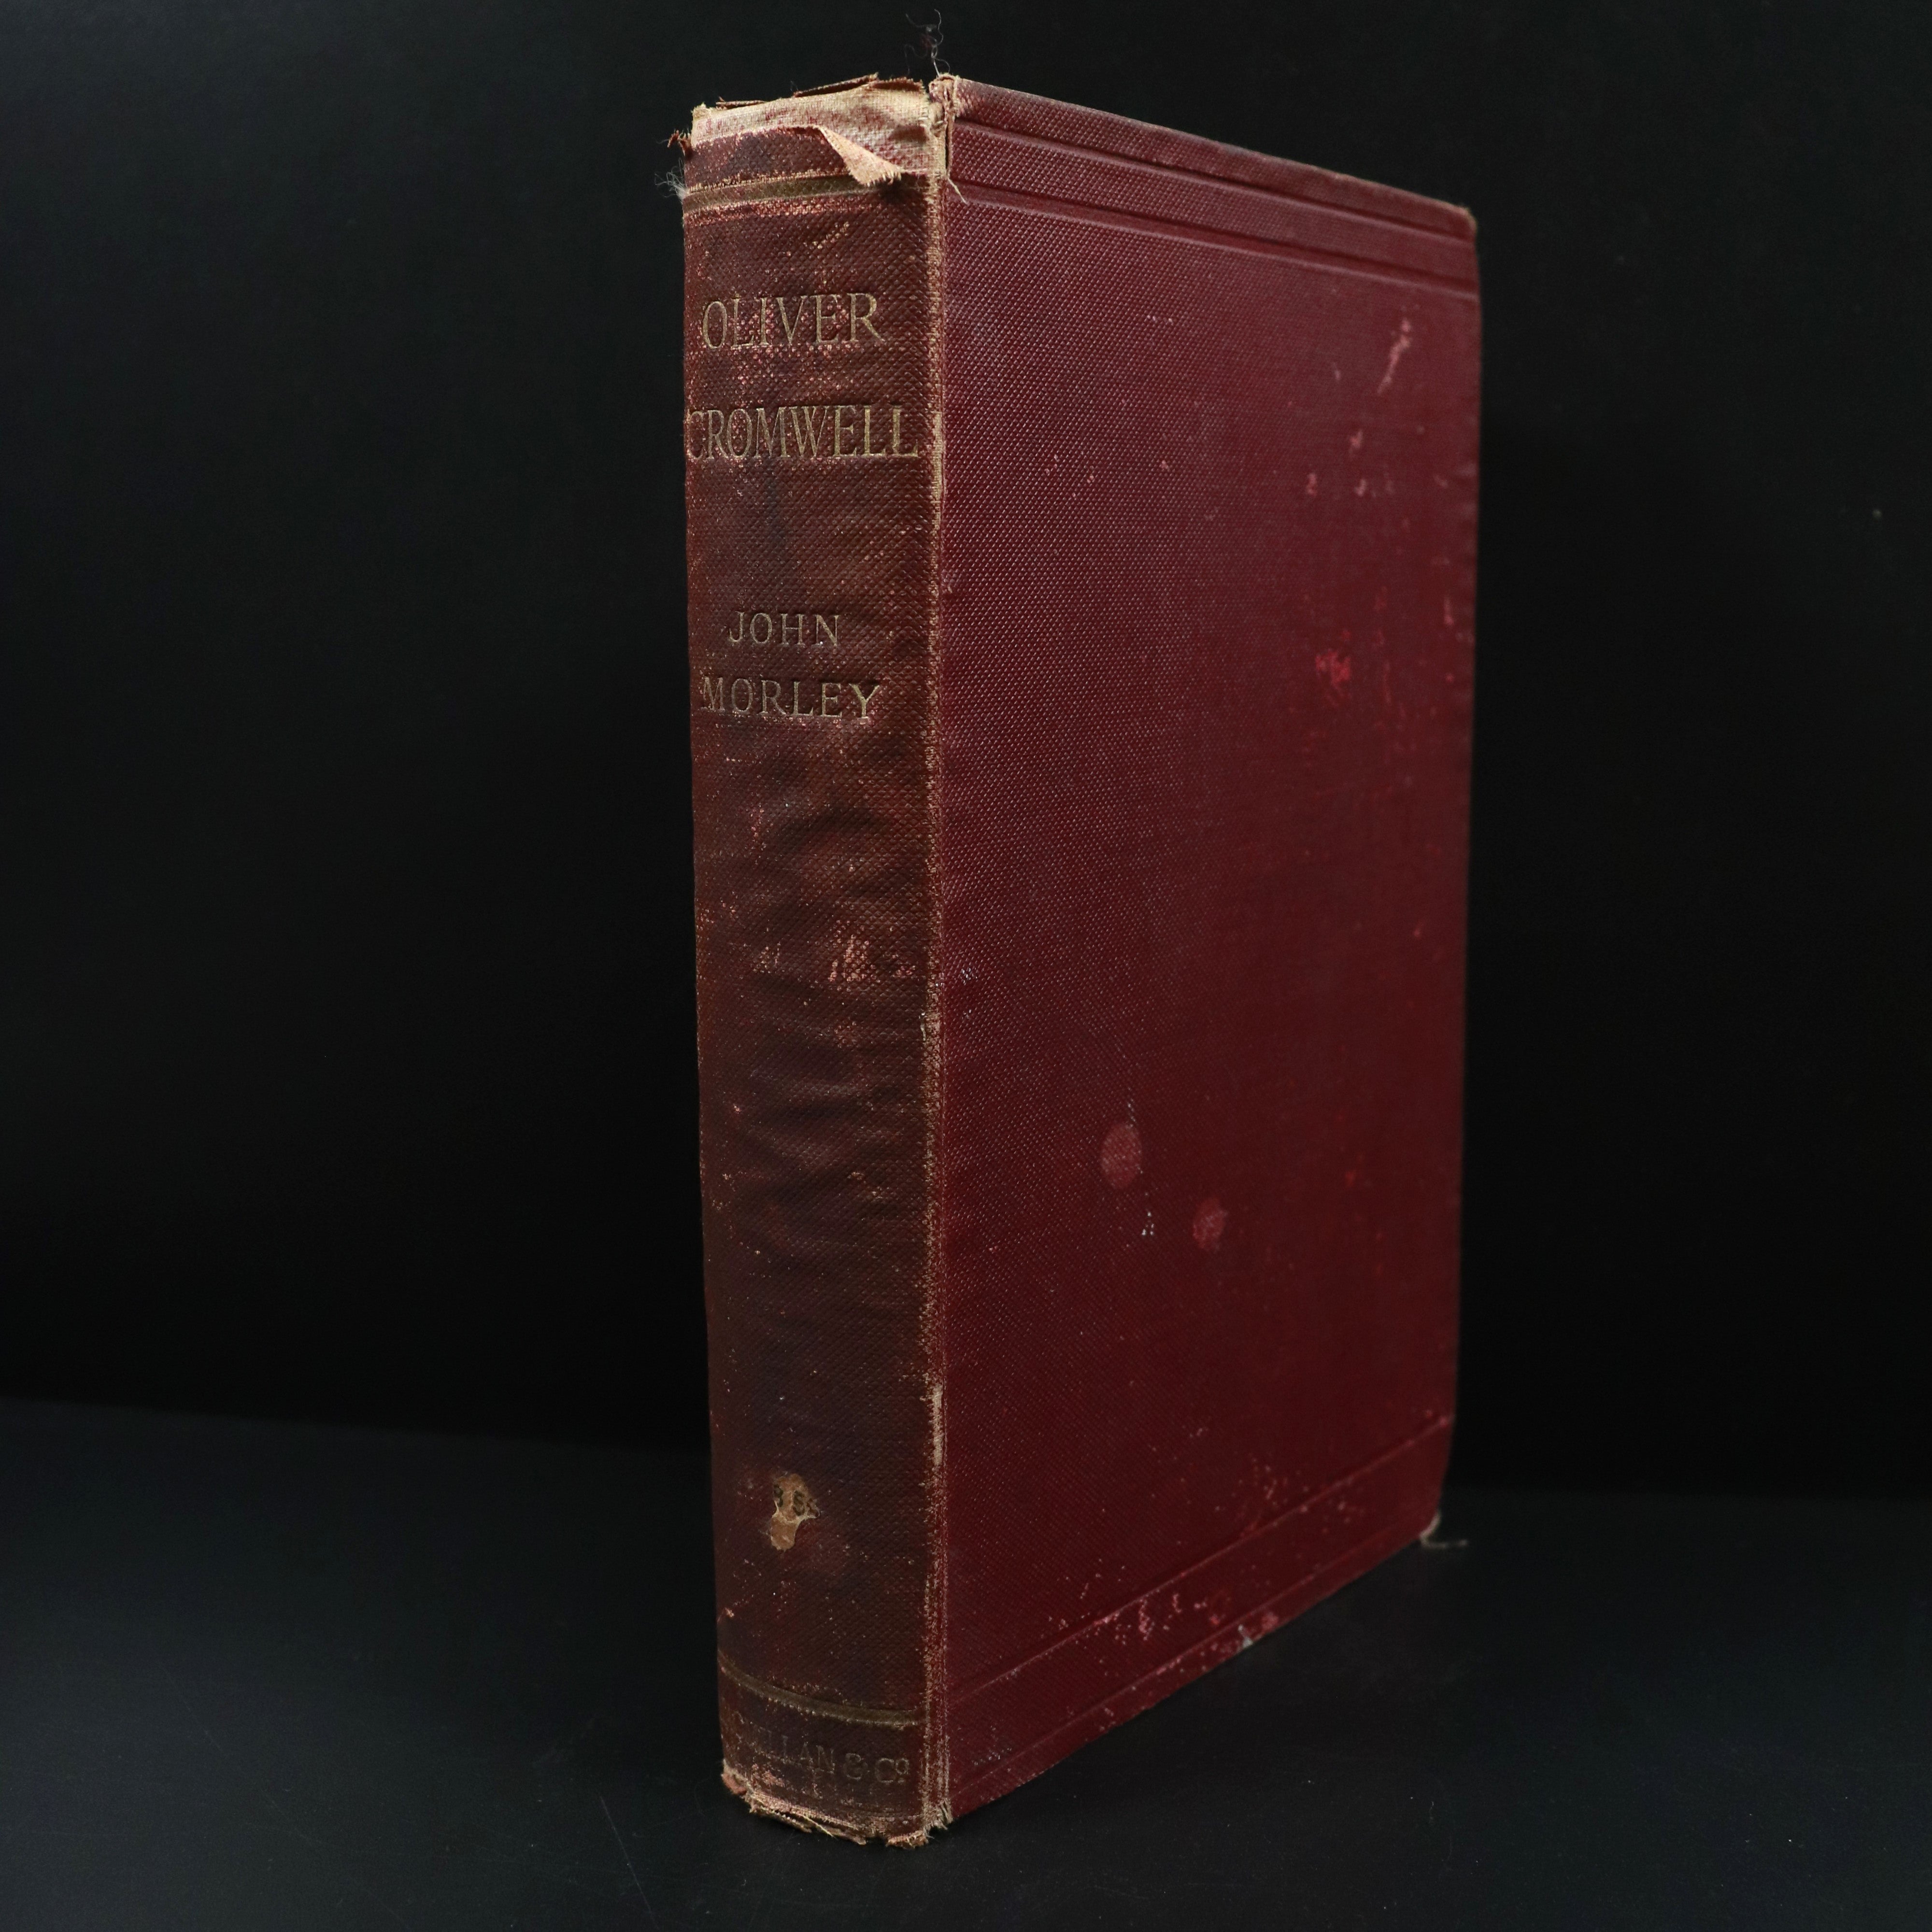 1901 Oliver Cromwell by John Morley Antique British History Book